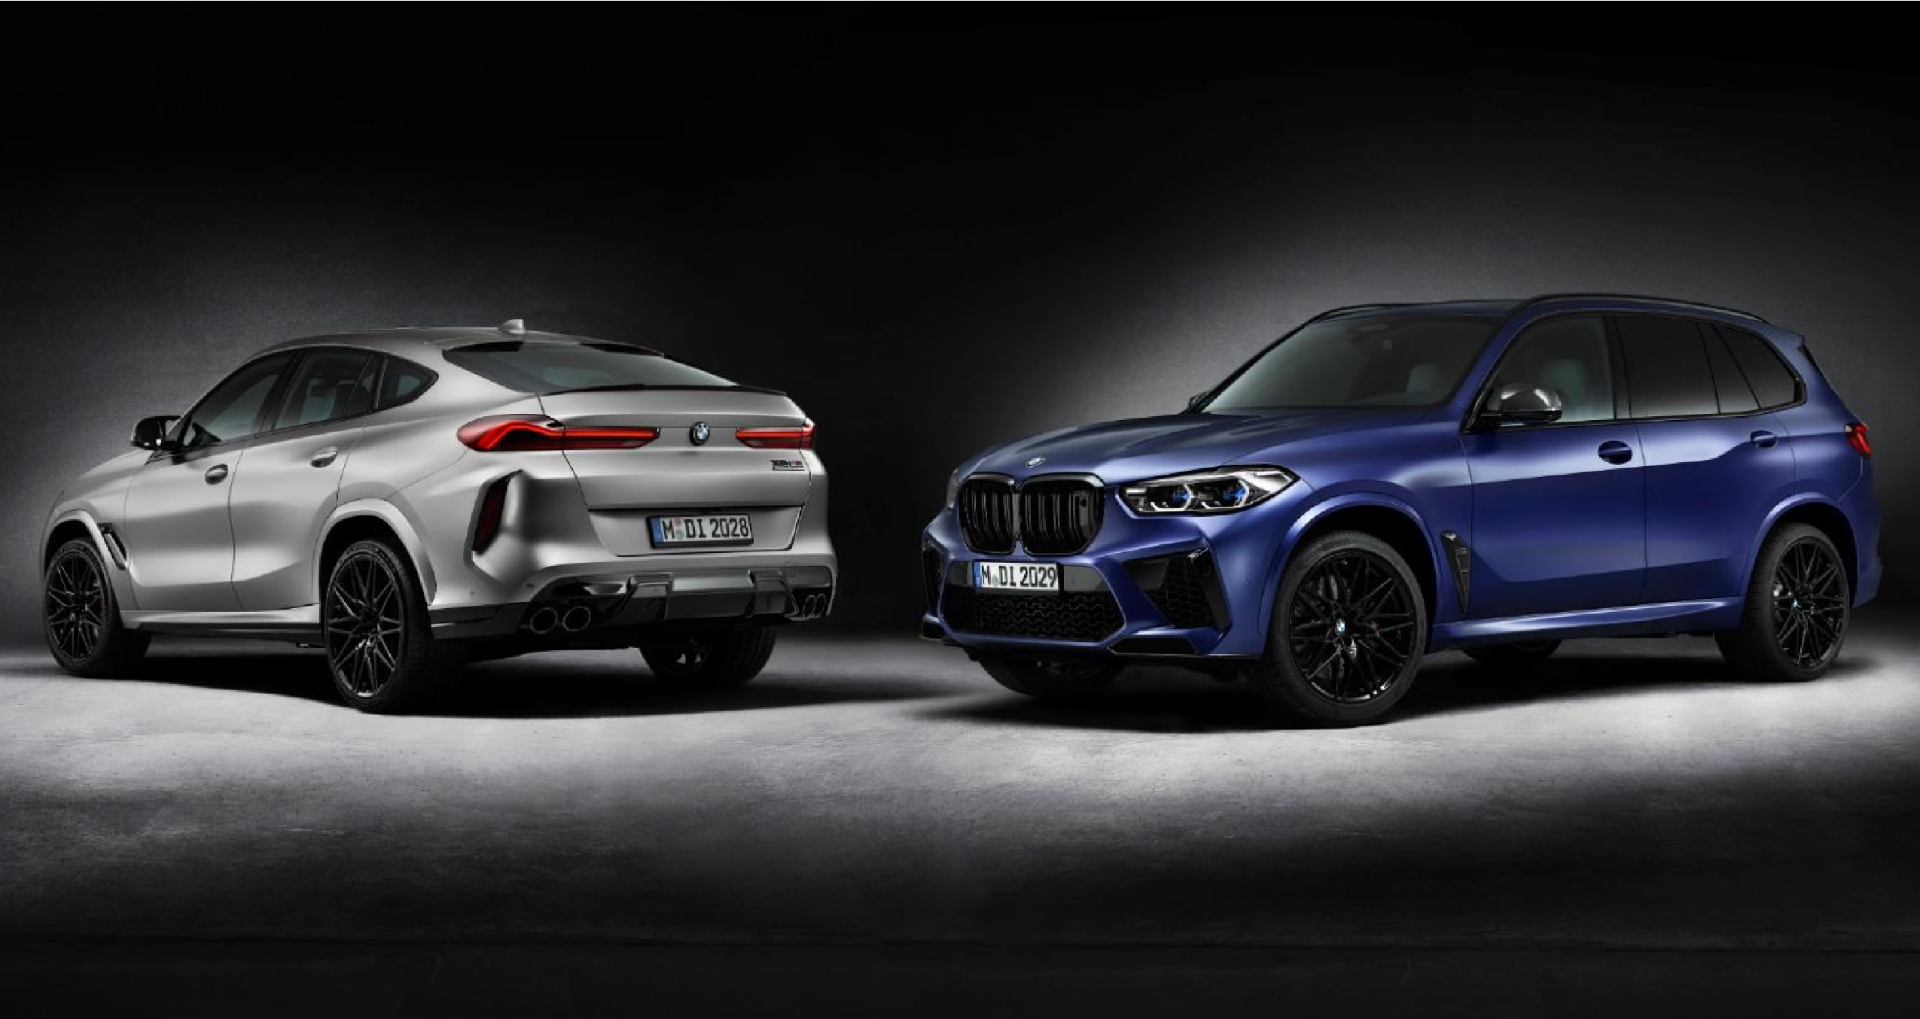 THE BMW X5 M COMPETITION AND X6 M COMPETITION FIRST EDITION.